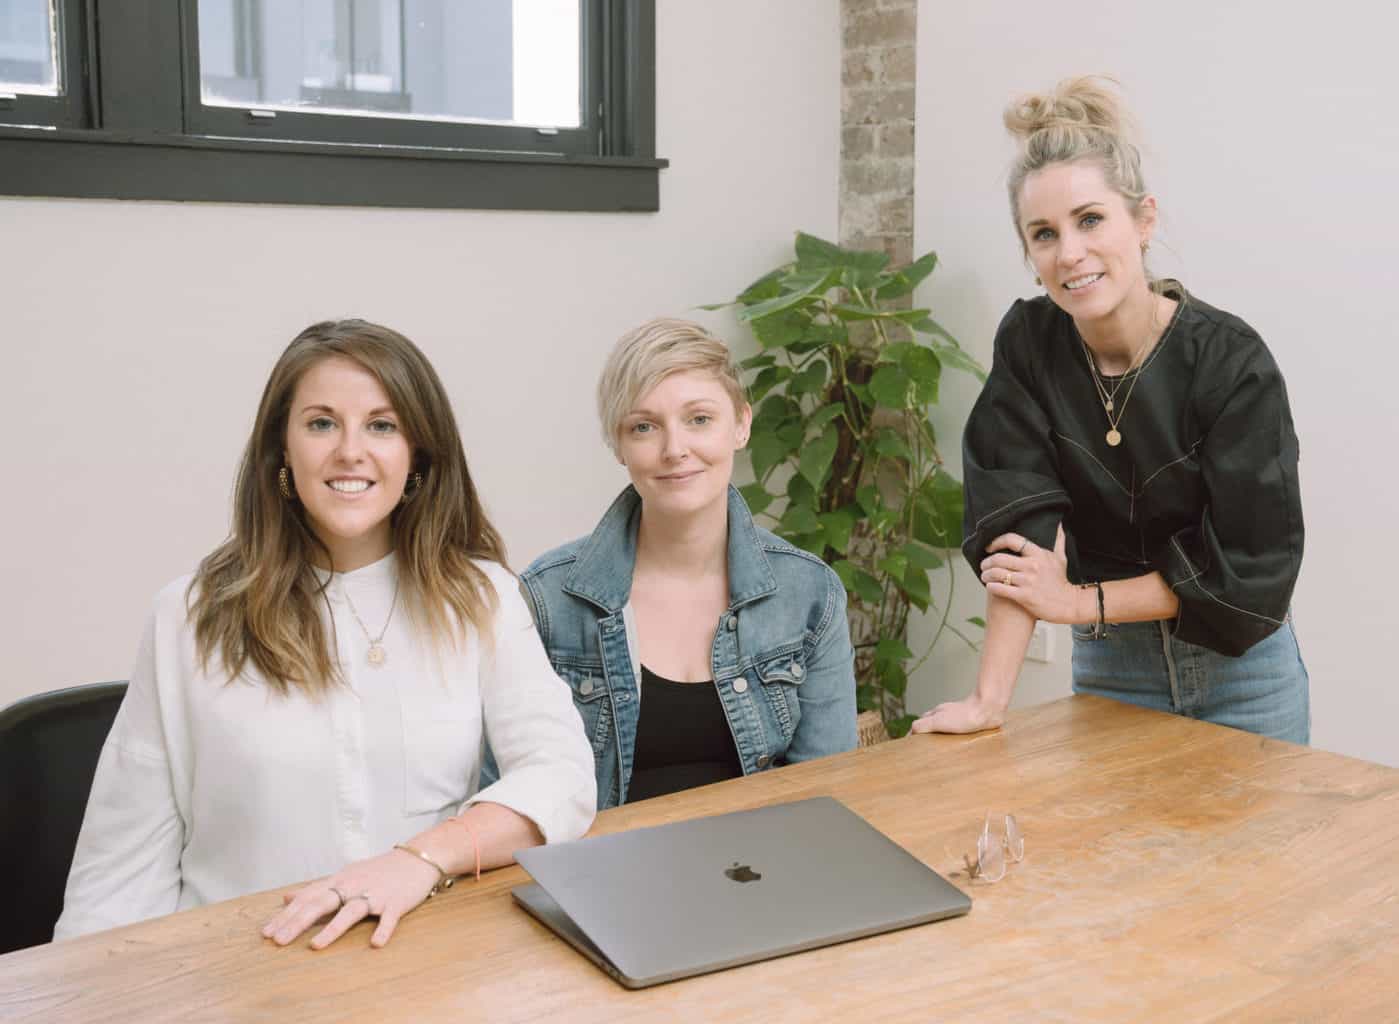 FRANKLY CO: Redefining Flexible Workspaces For Women